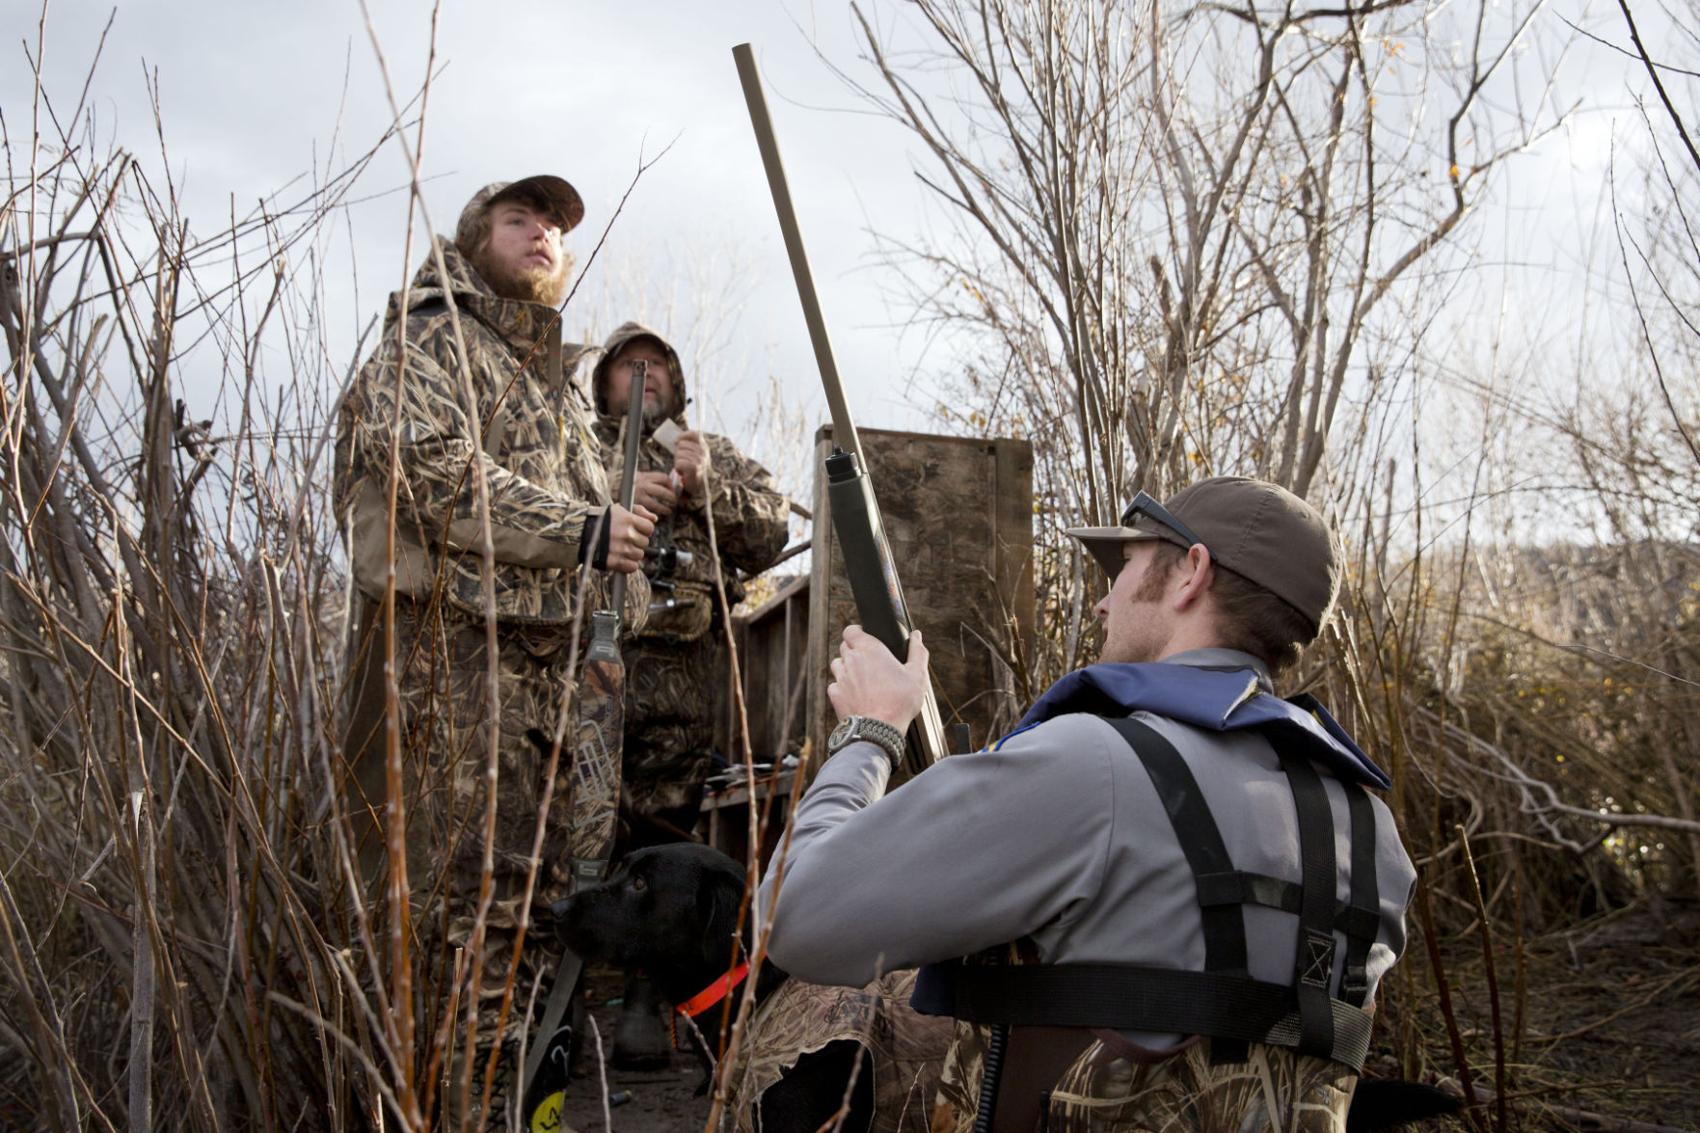 Phillips Why Idaho's waterfowl hunting seasons are about to change